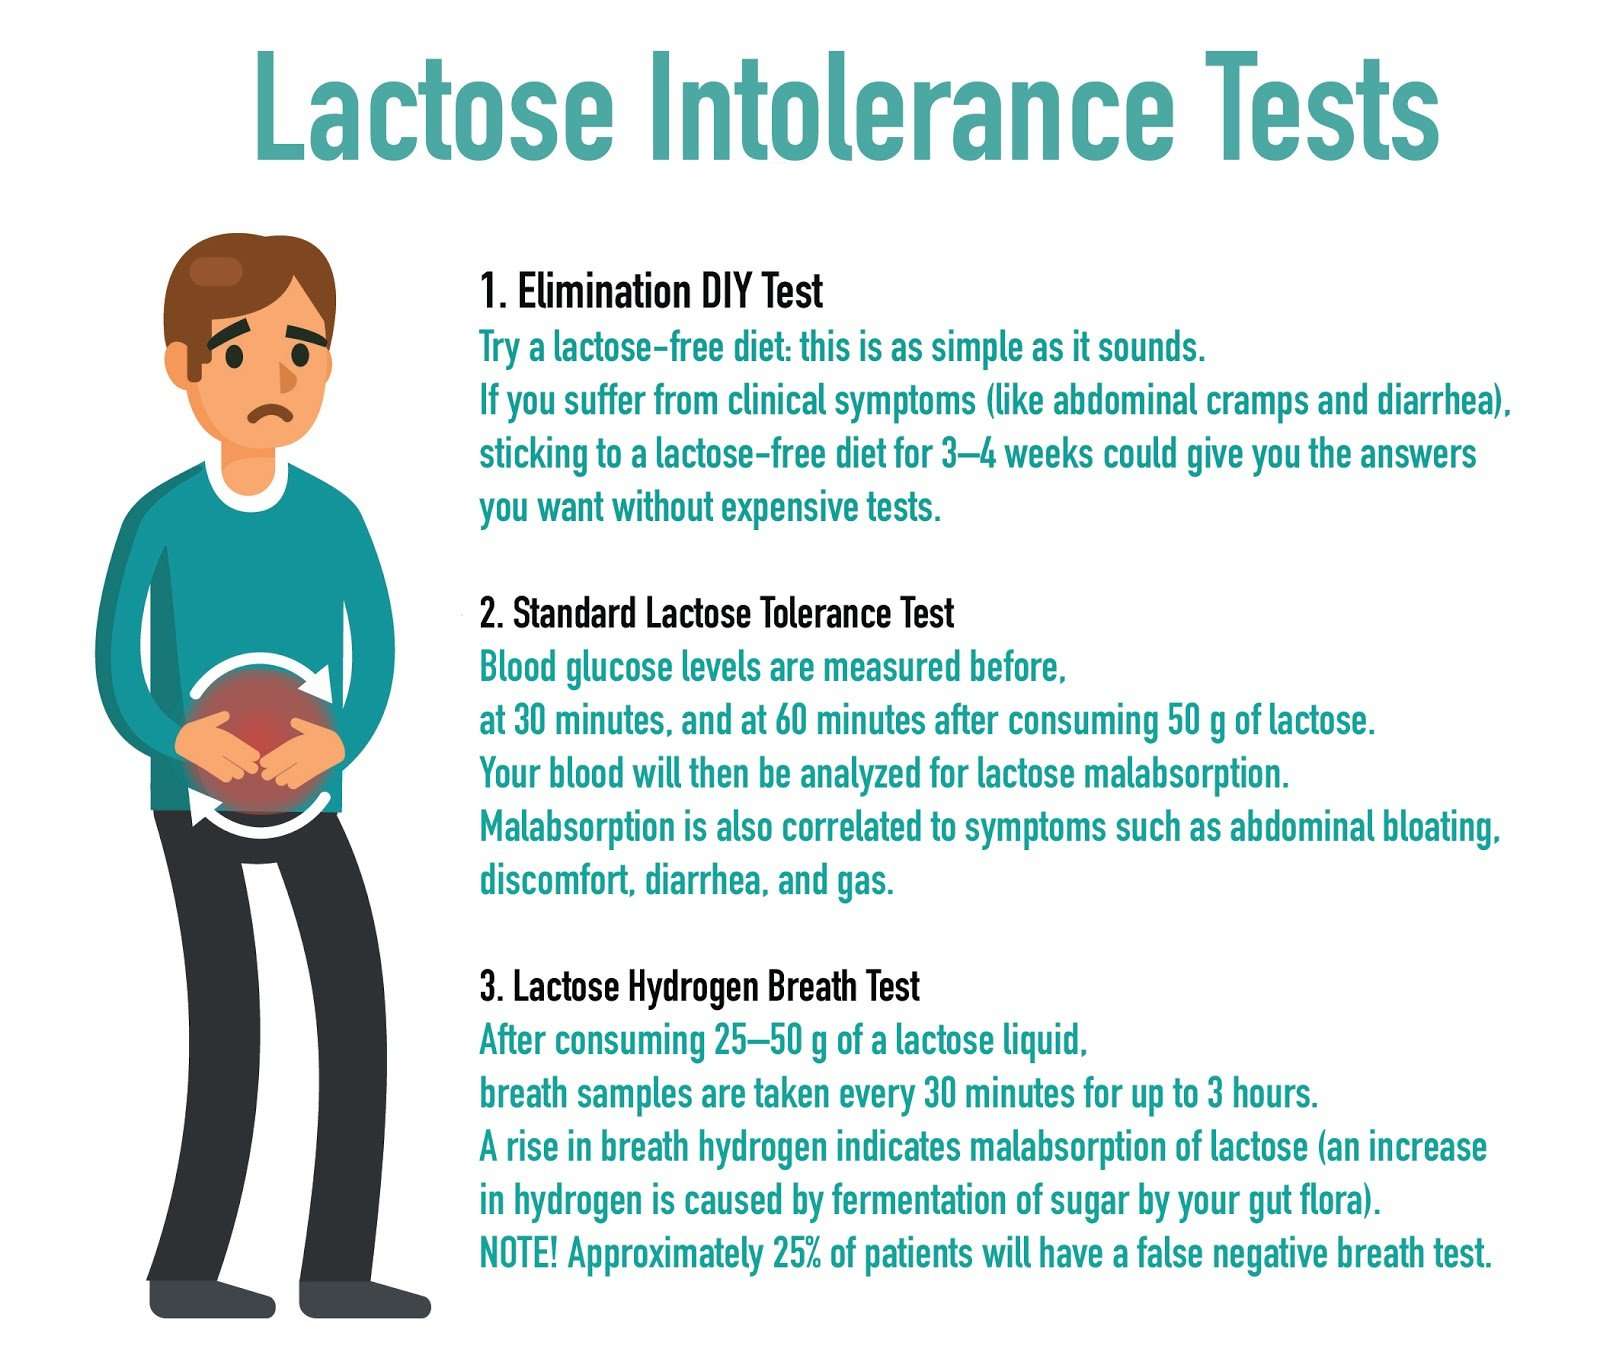 Are You Really Lactose Intolerant?